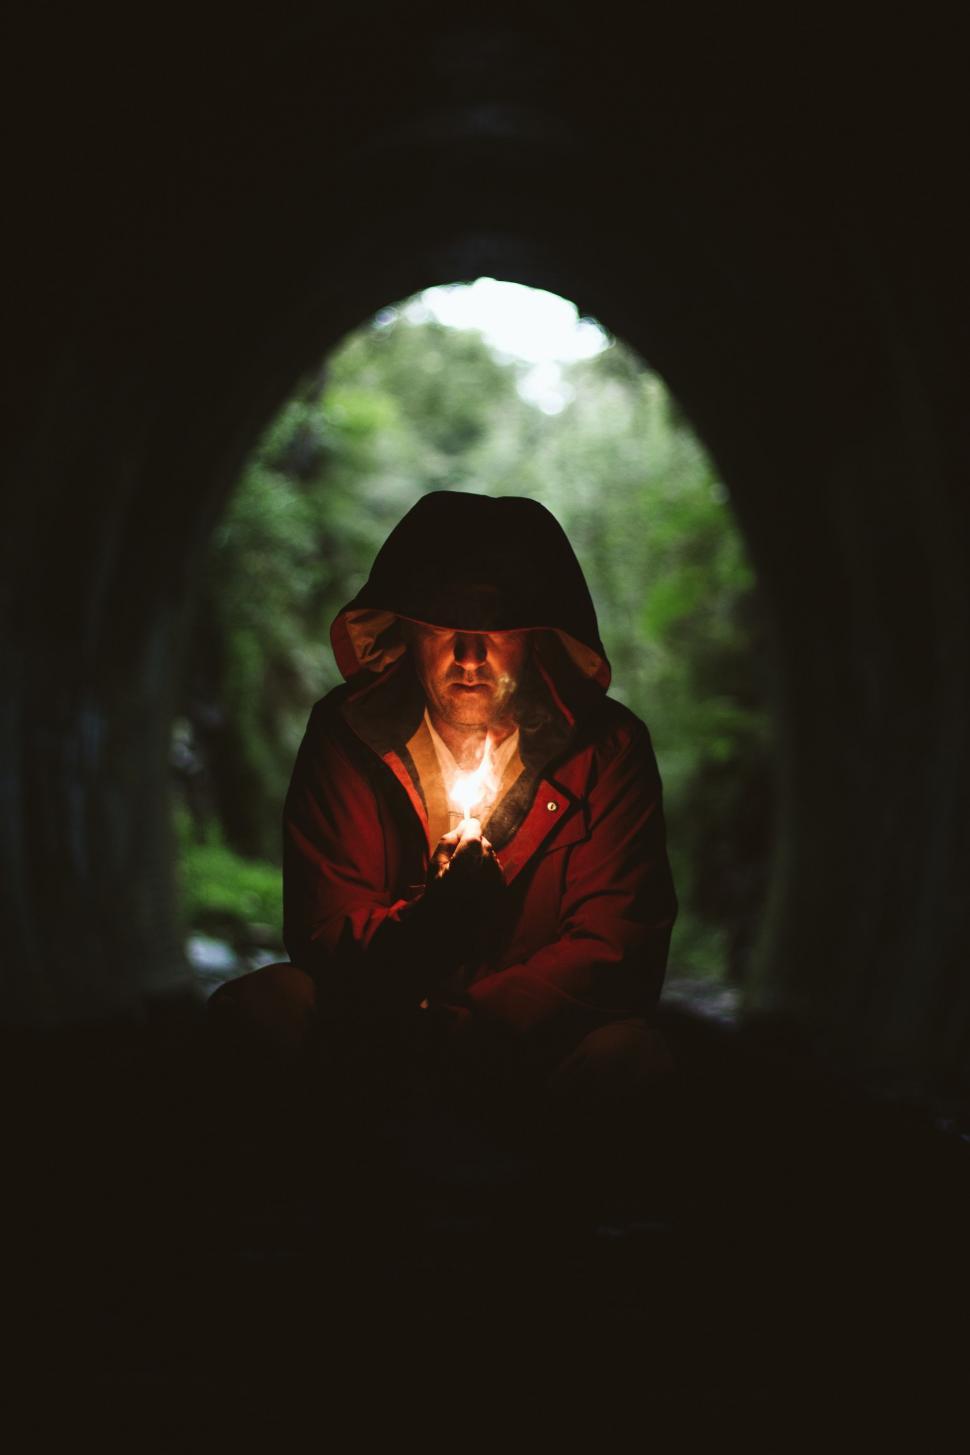 Free Image of Man Holding Lit Candle Sitting in Dark Tunnel 